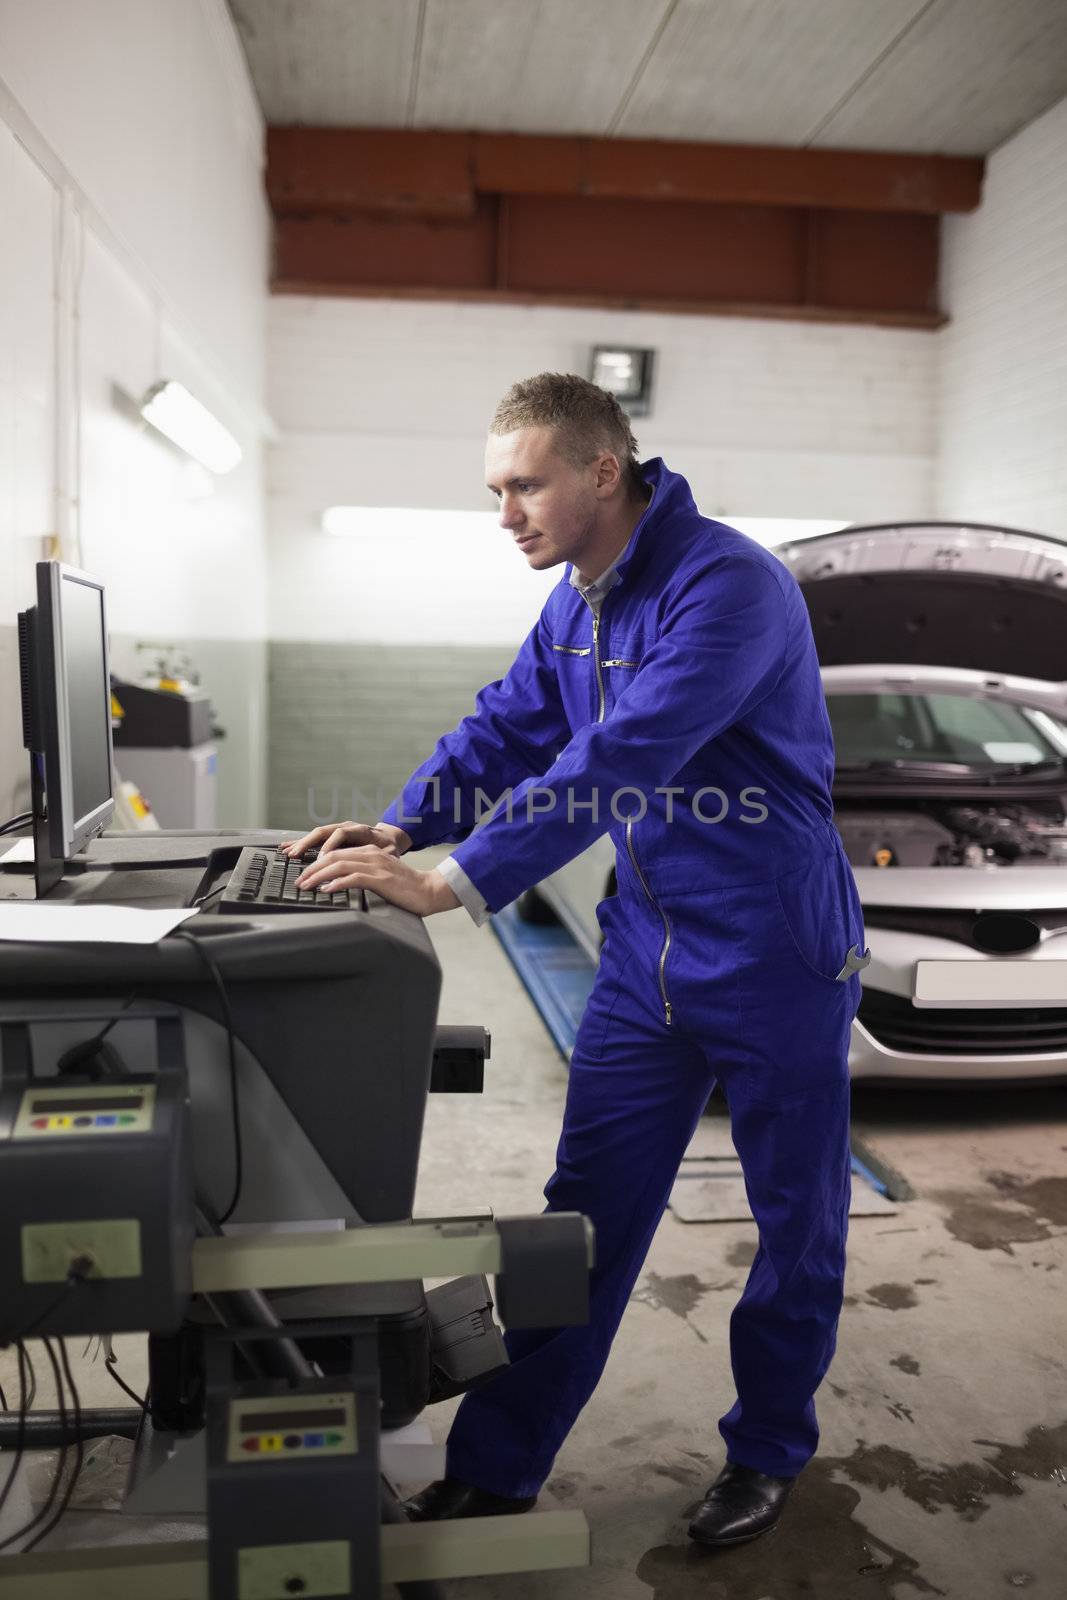 Concentrated mechanic using a computer in a garage